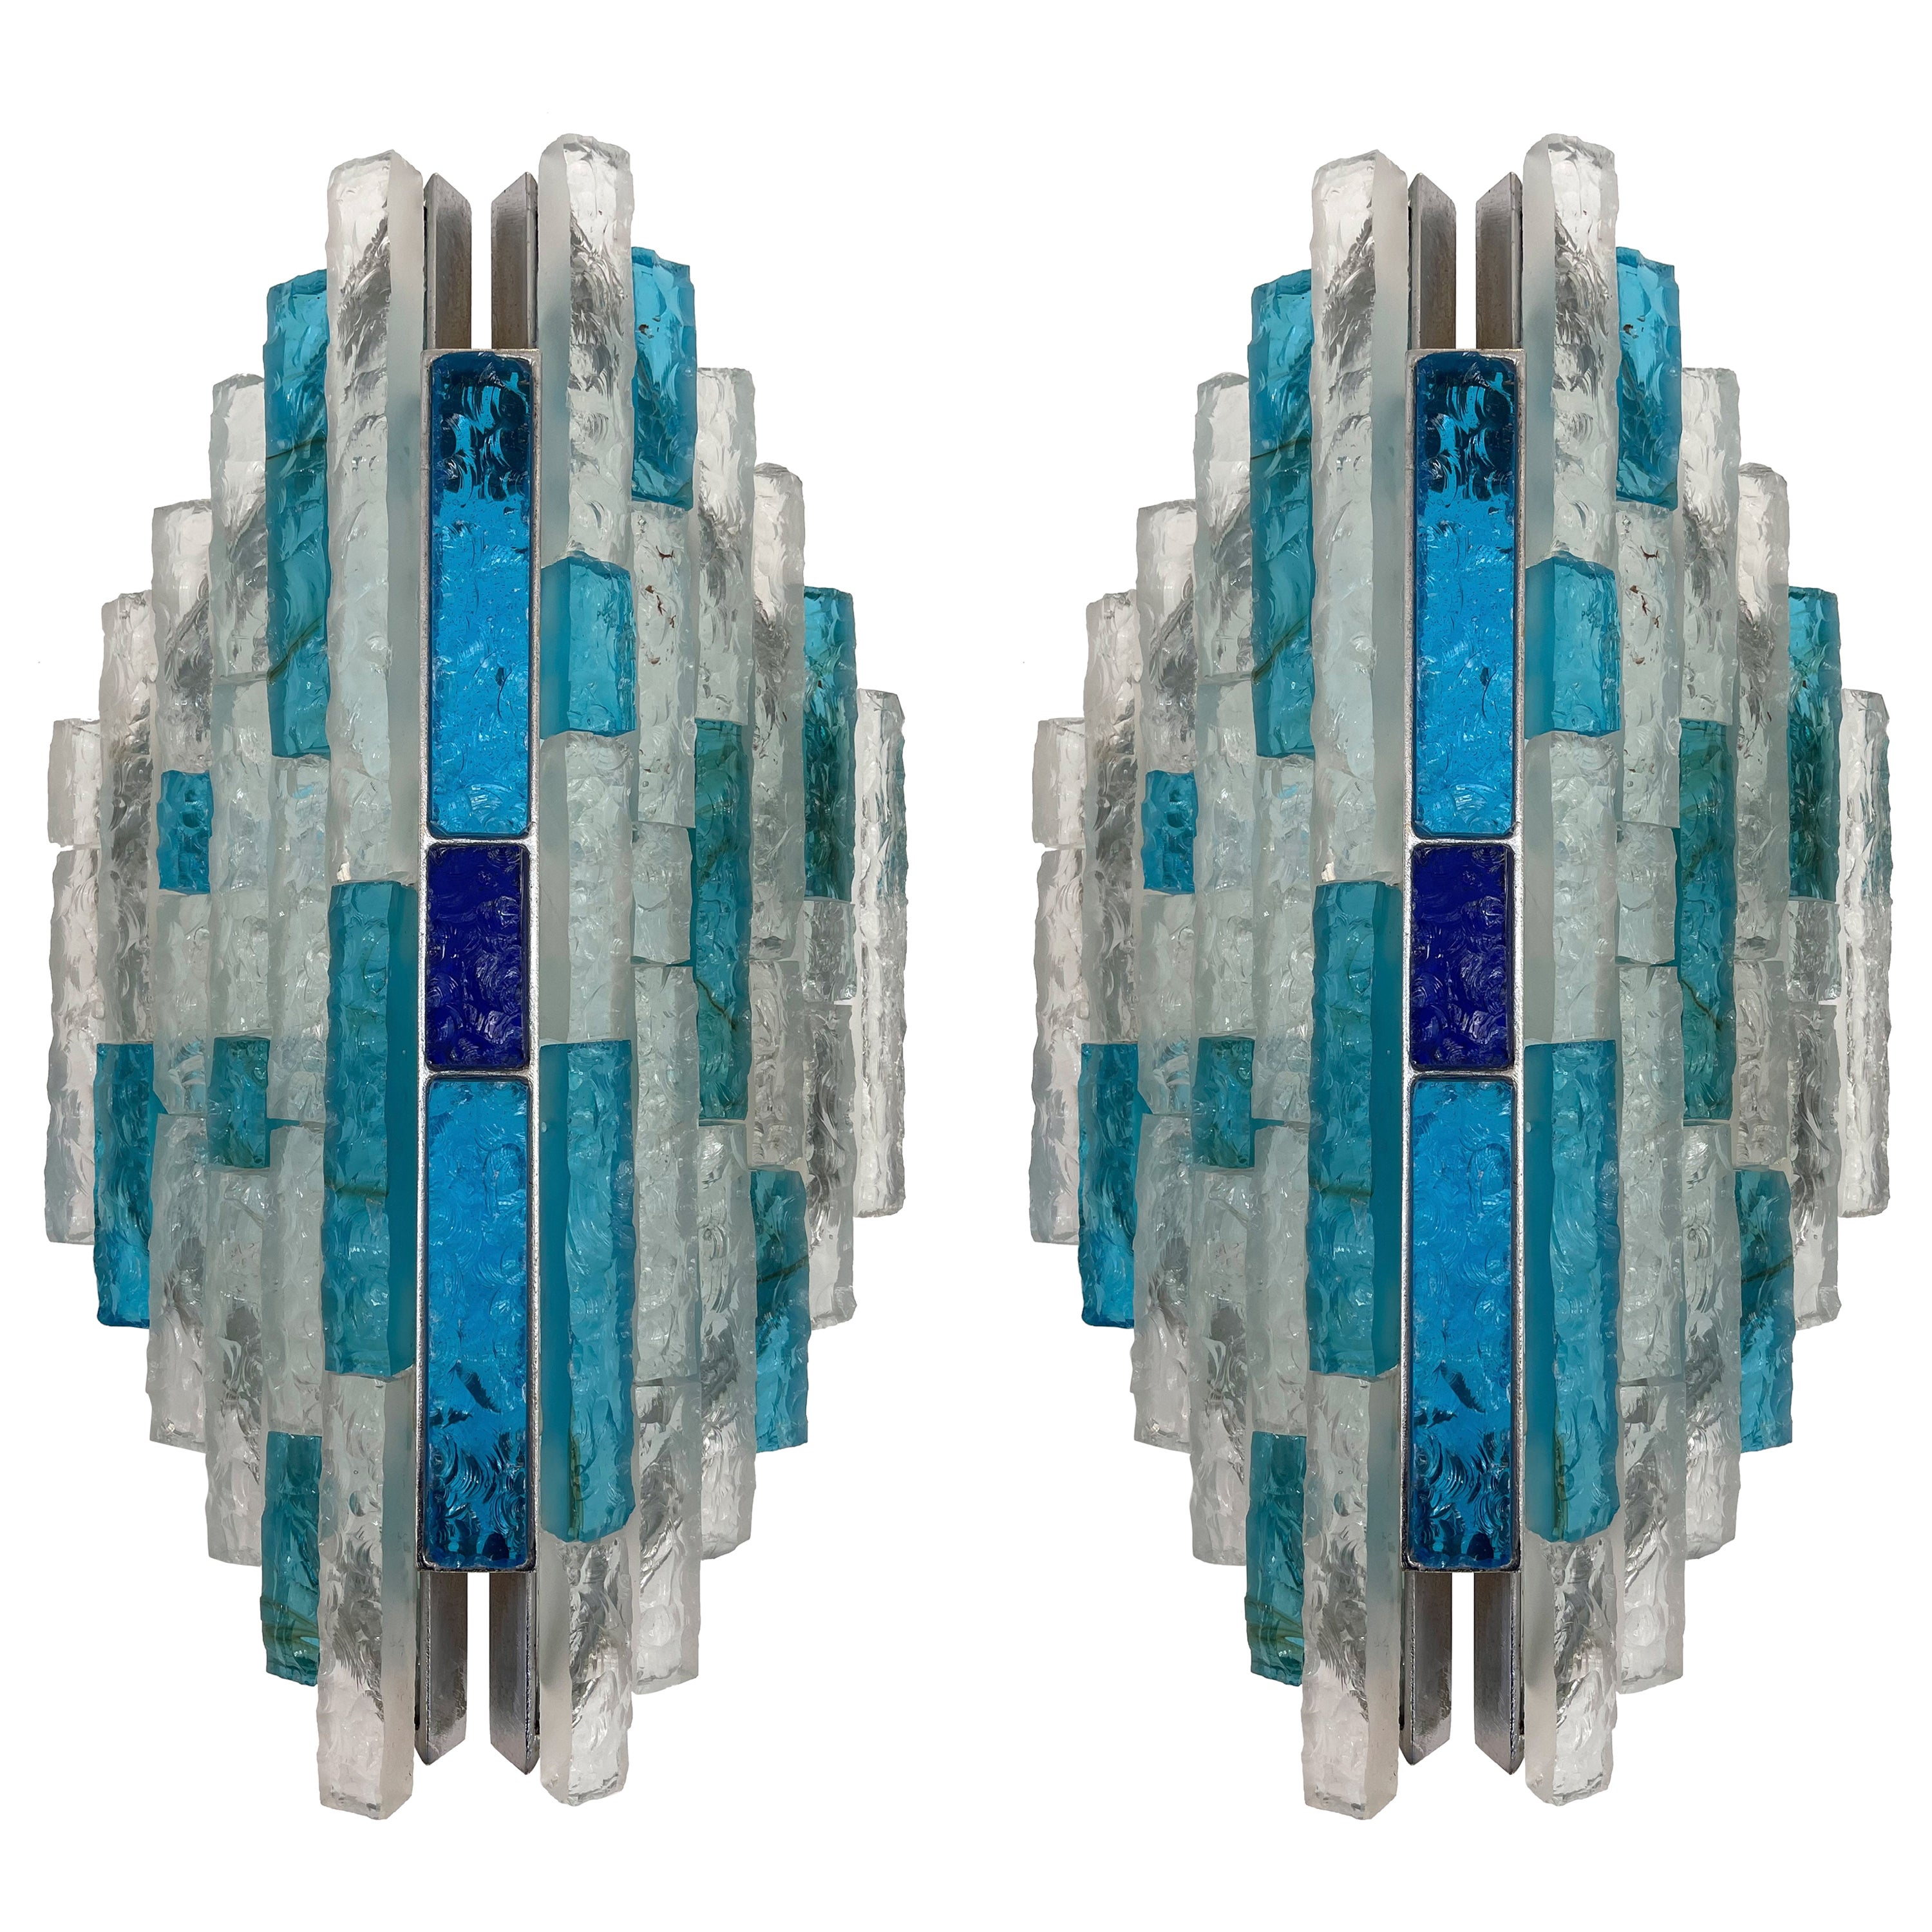 Pair of Hammered Glass and Silver Iron Sconces by Biancardi, Italy, 1970s